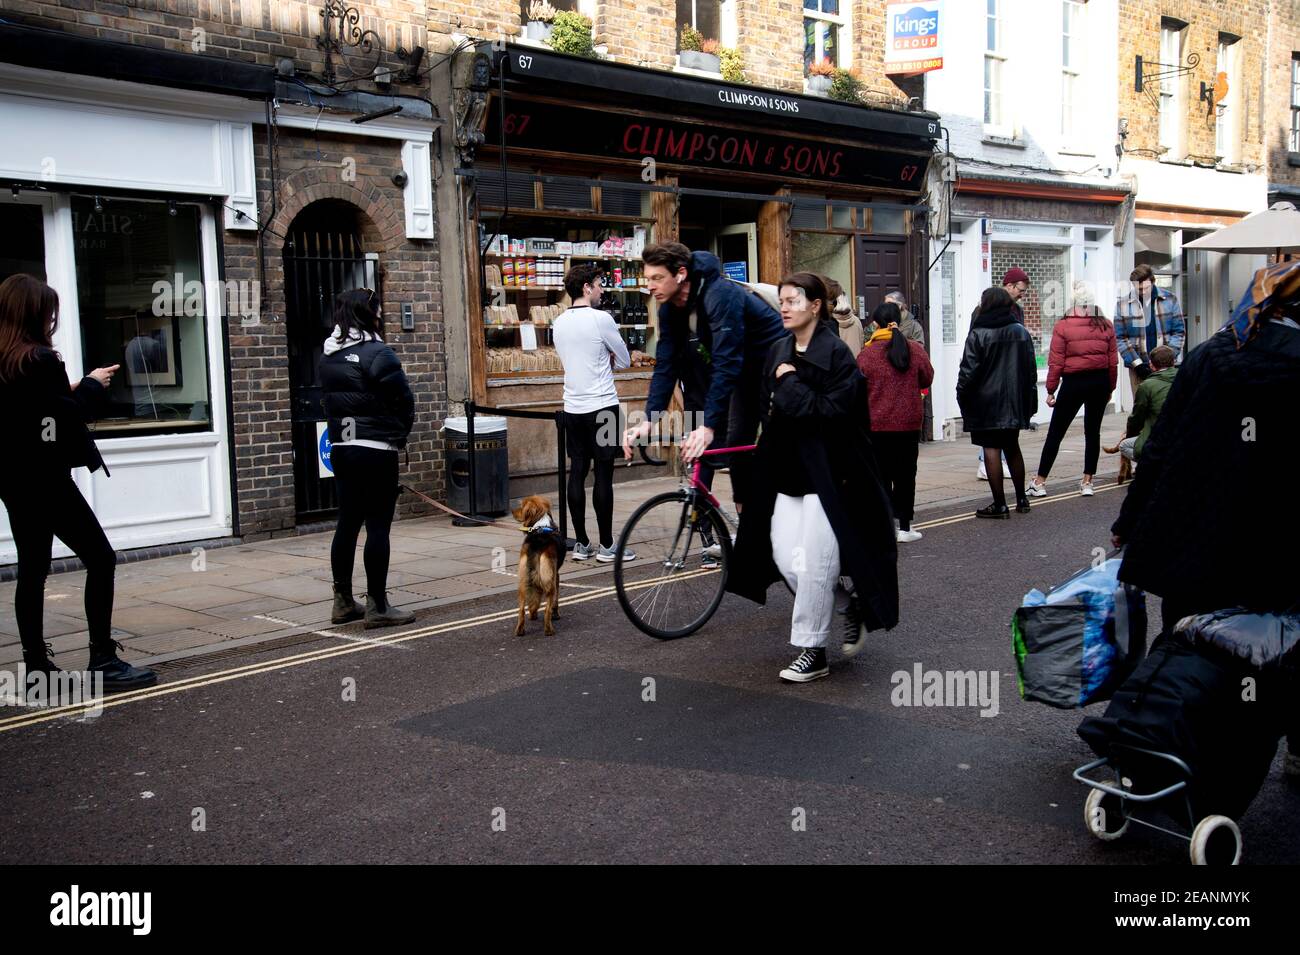 February in Hackney. Broadway market. Young people queue to buy coffee at Climpsons. Stock Photo